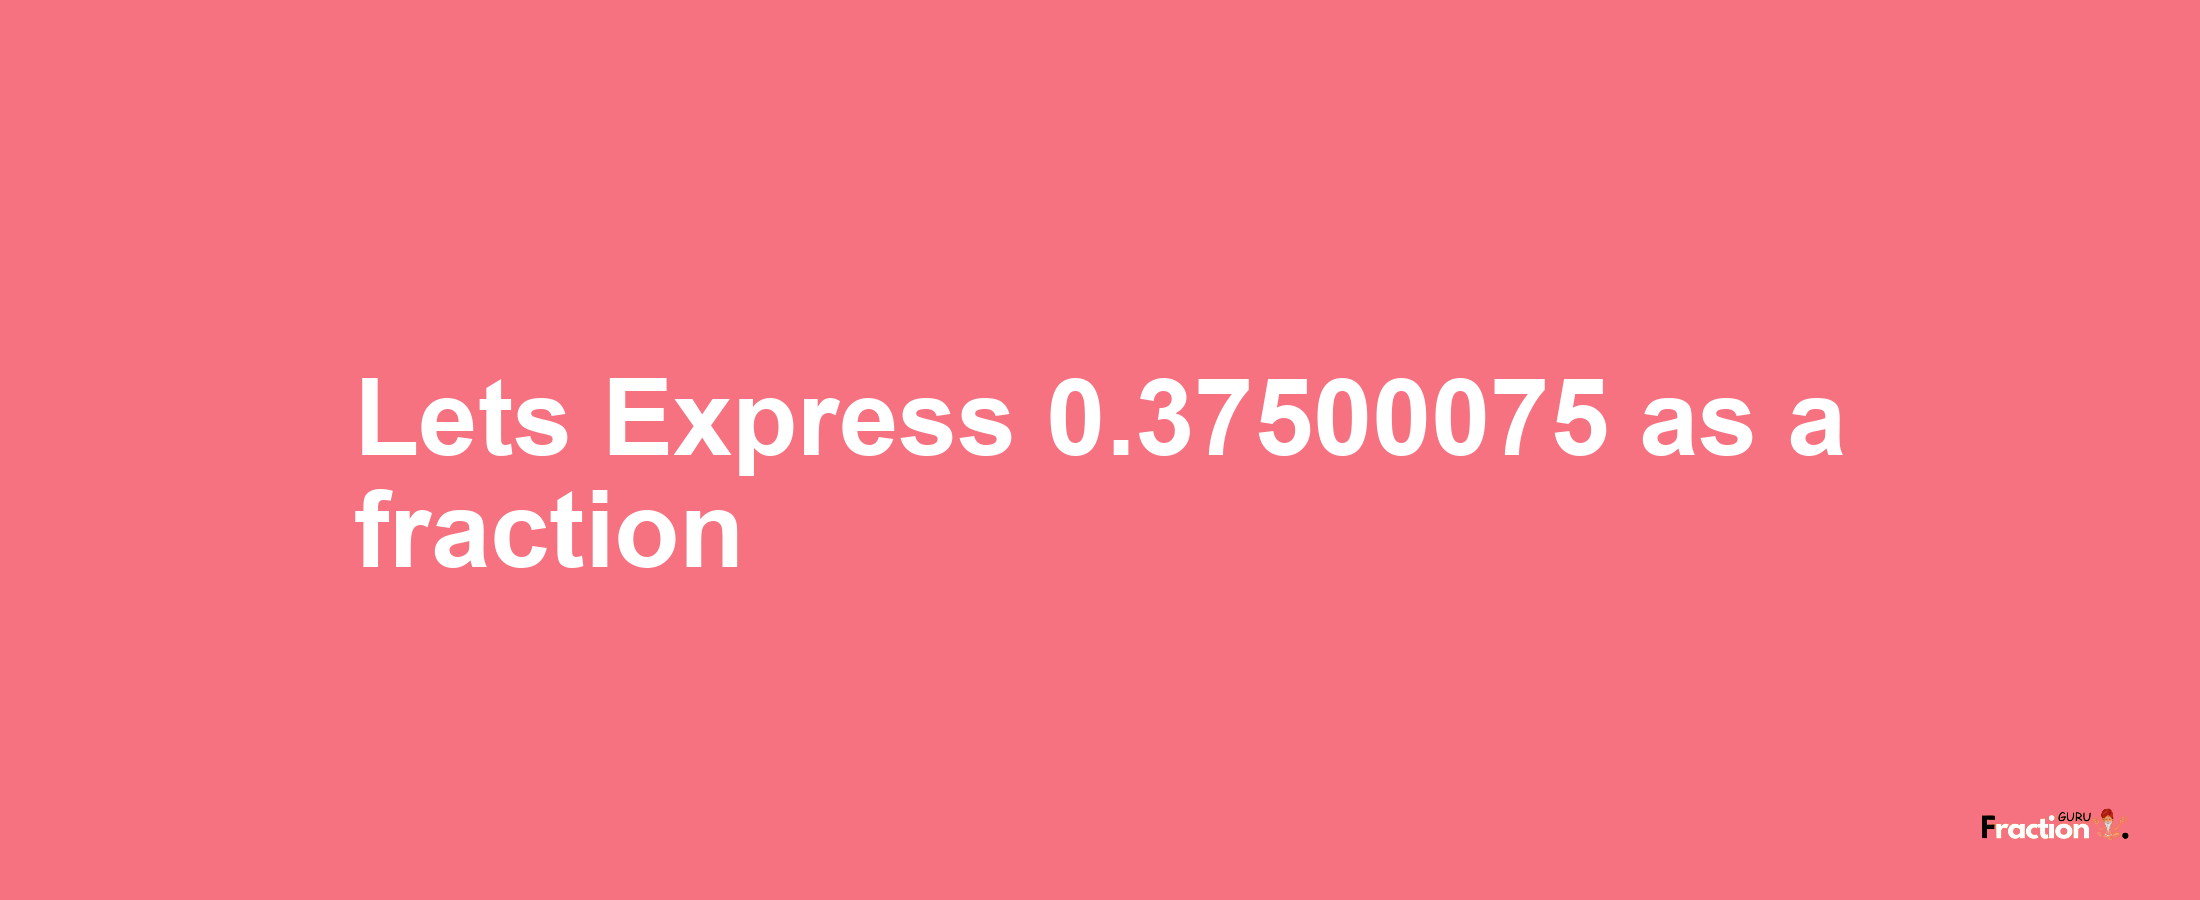 Lets Express 0.37500075 as afraction